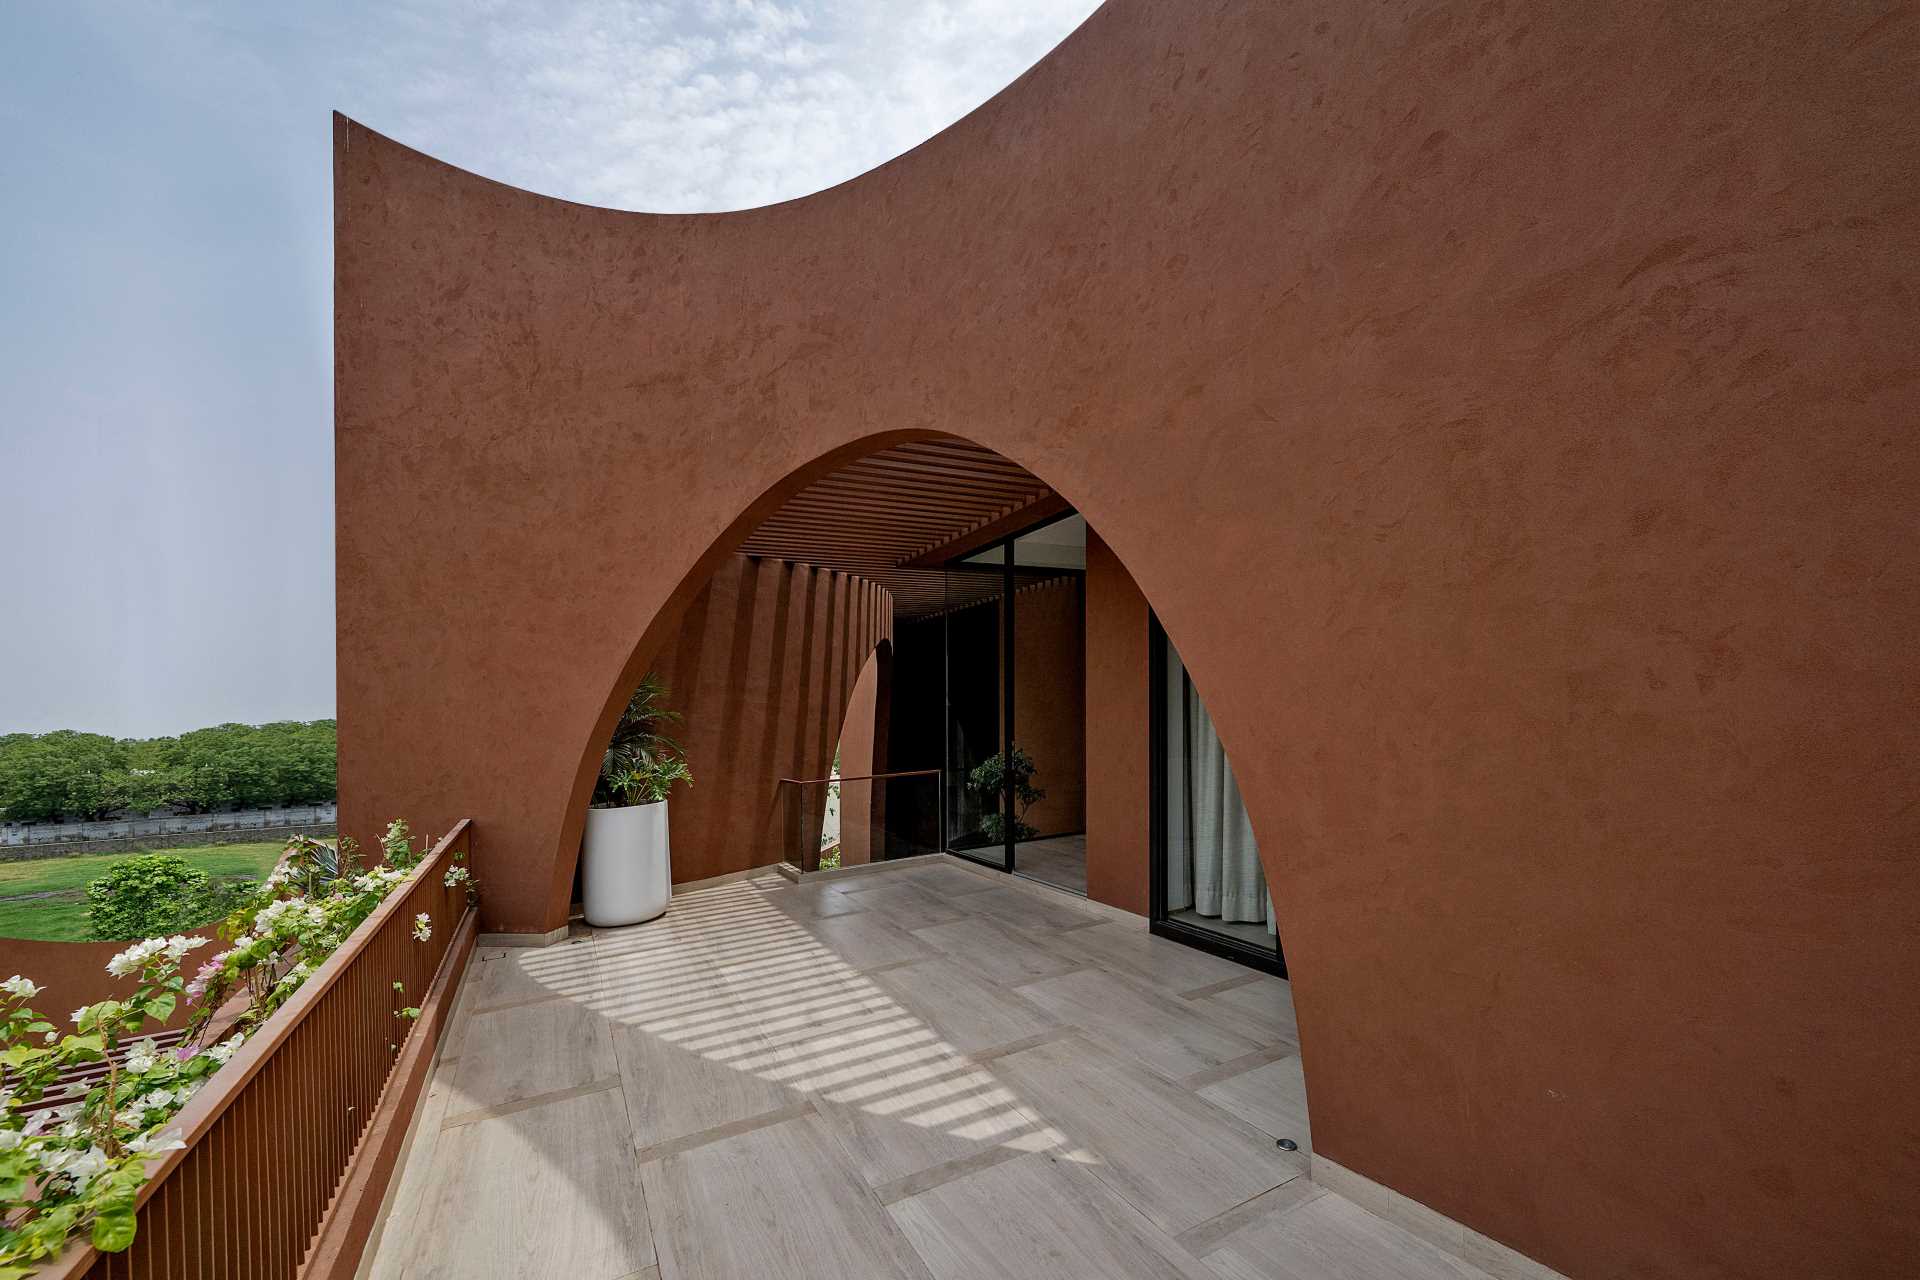 A sculptural house with arches scattered throughout its design.